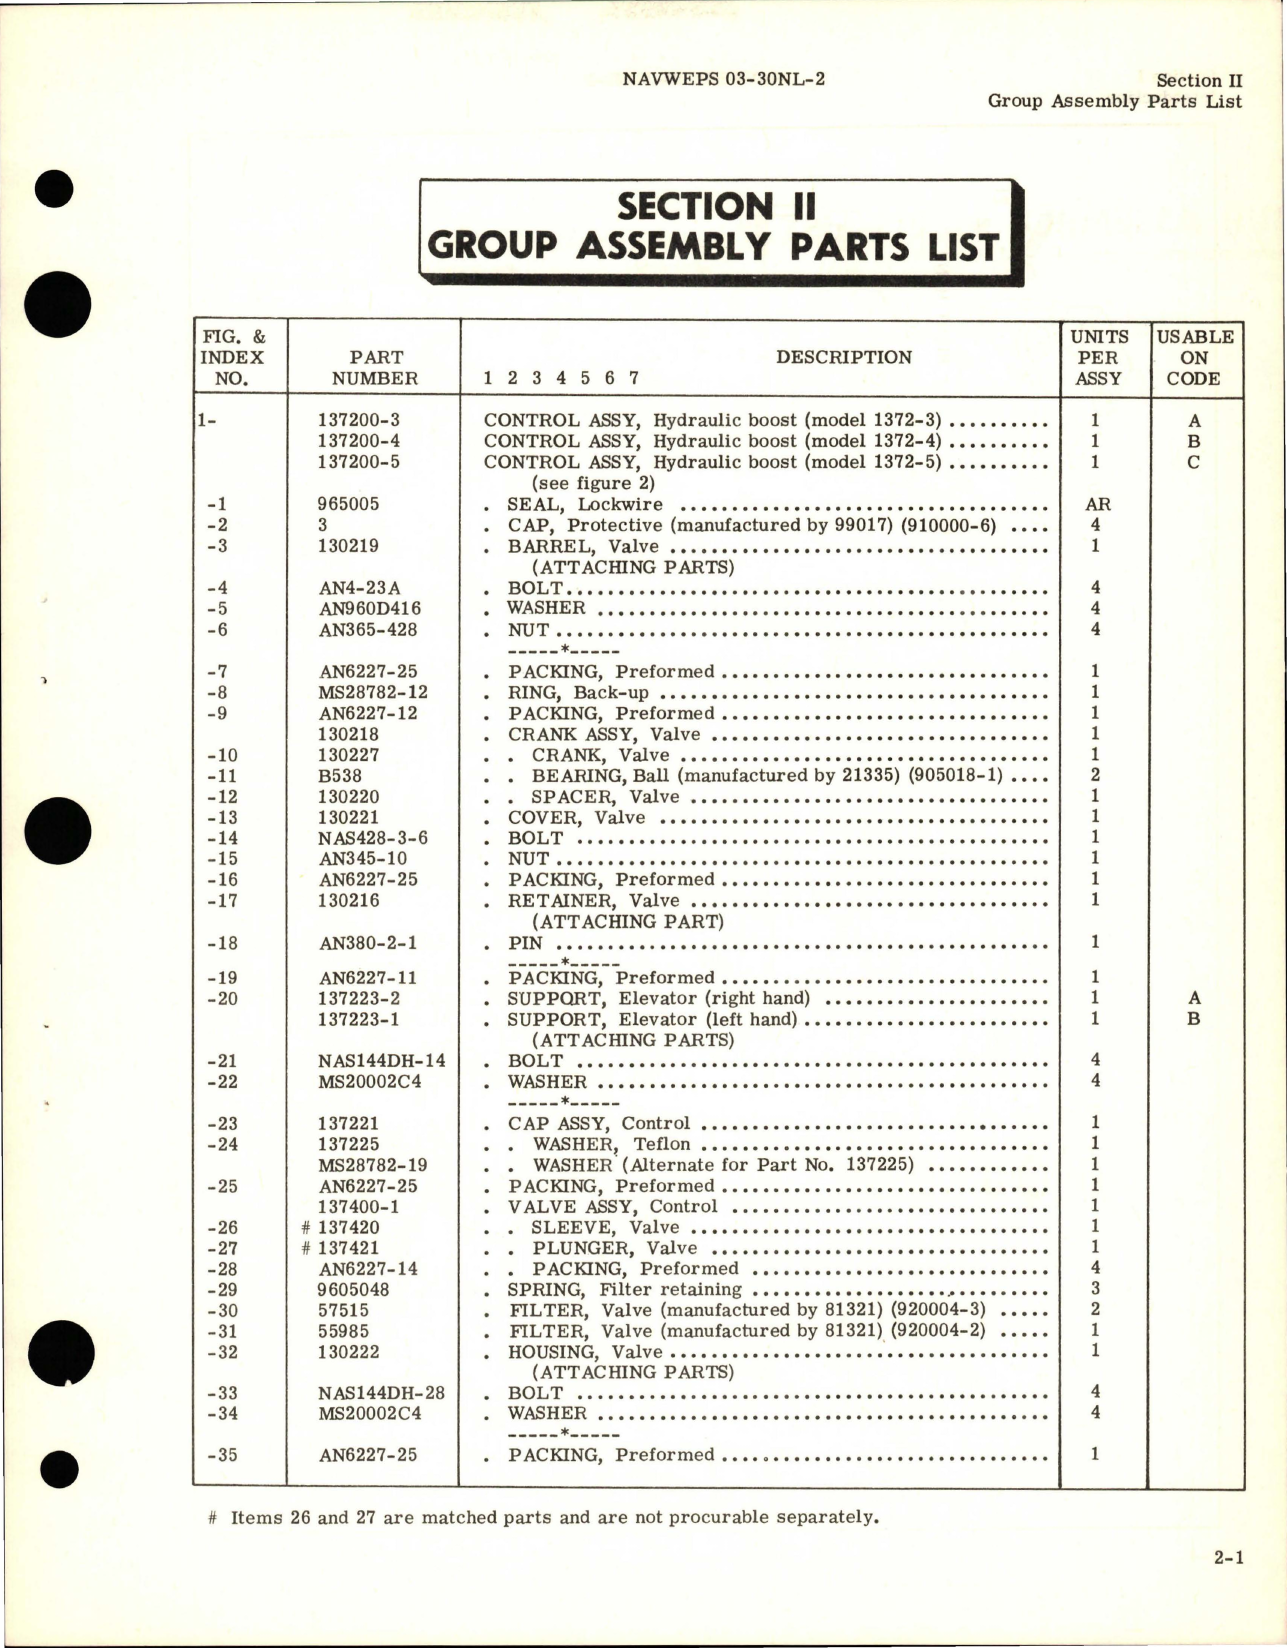 Sample page 7 from AirCorps Library document: Illustrated Parts Breakdown for Hydraulic Boost Control Assembly - Parts 137200-3, 137200-4, and 137200-5